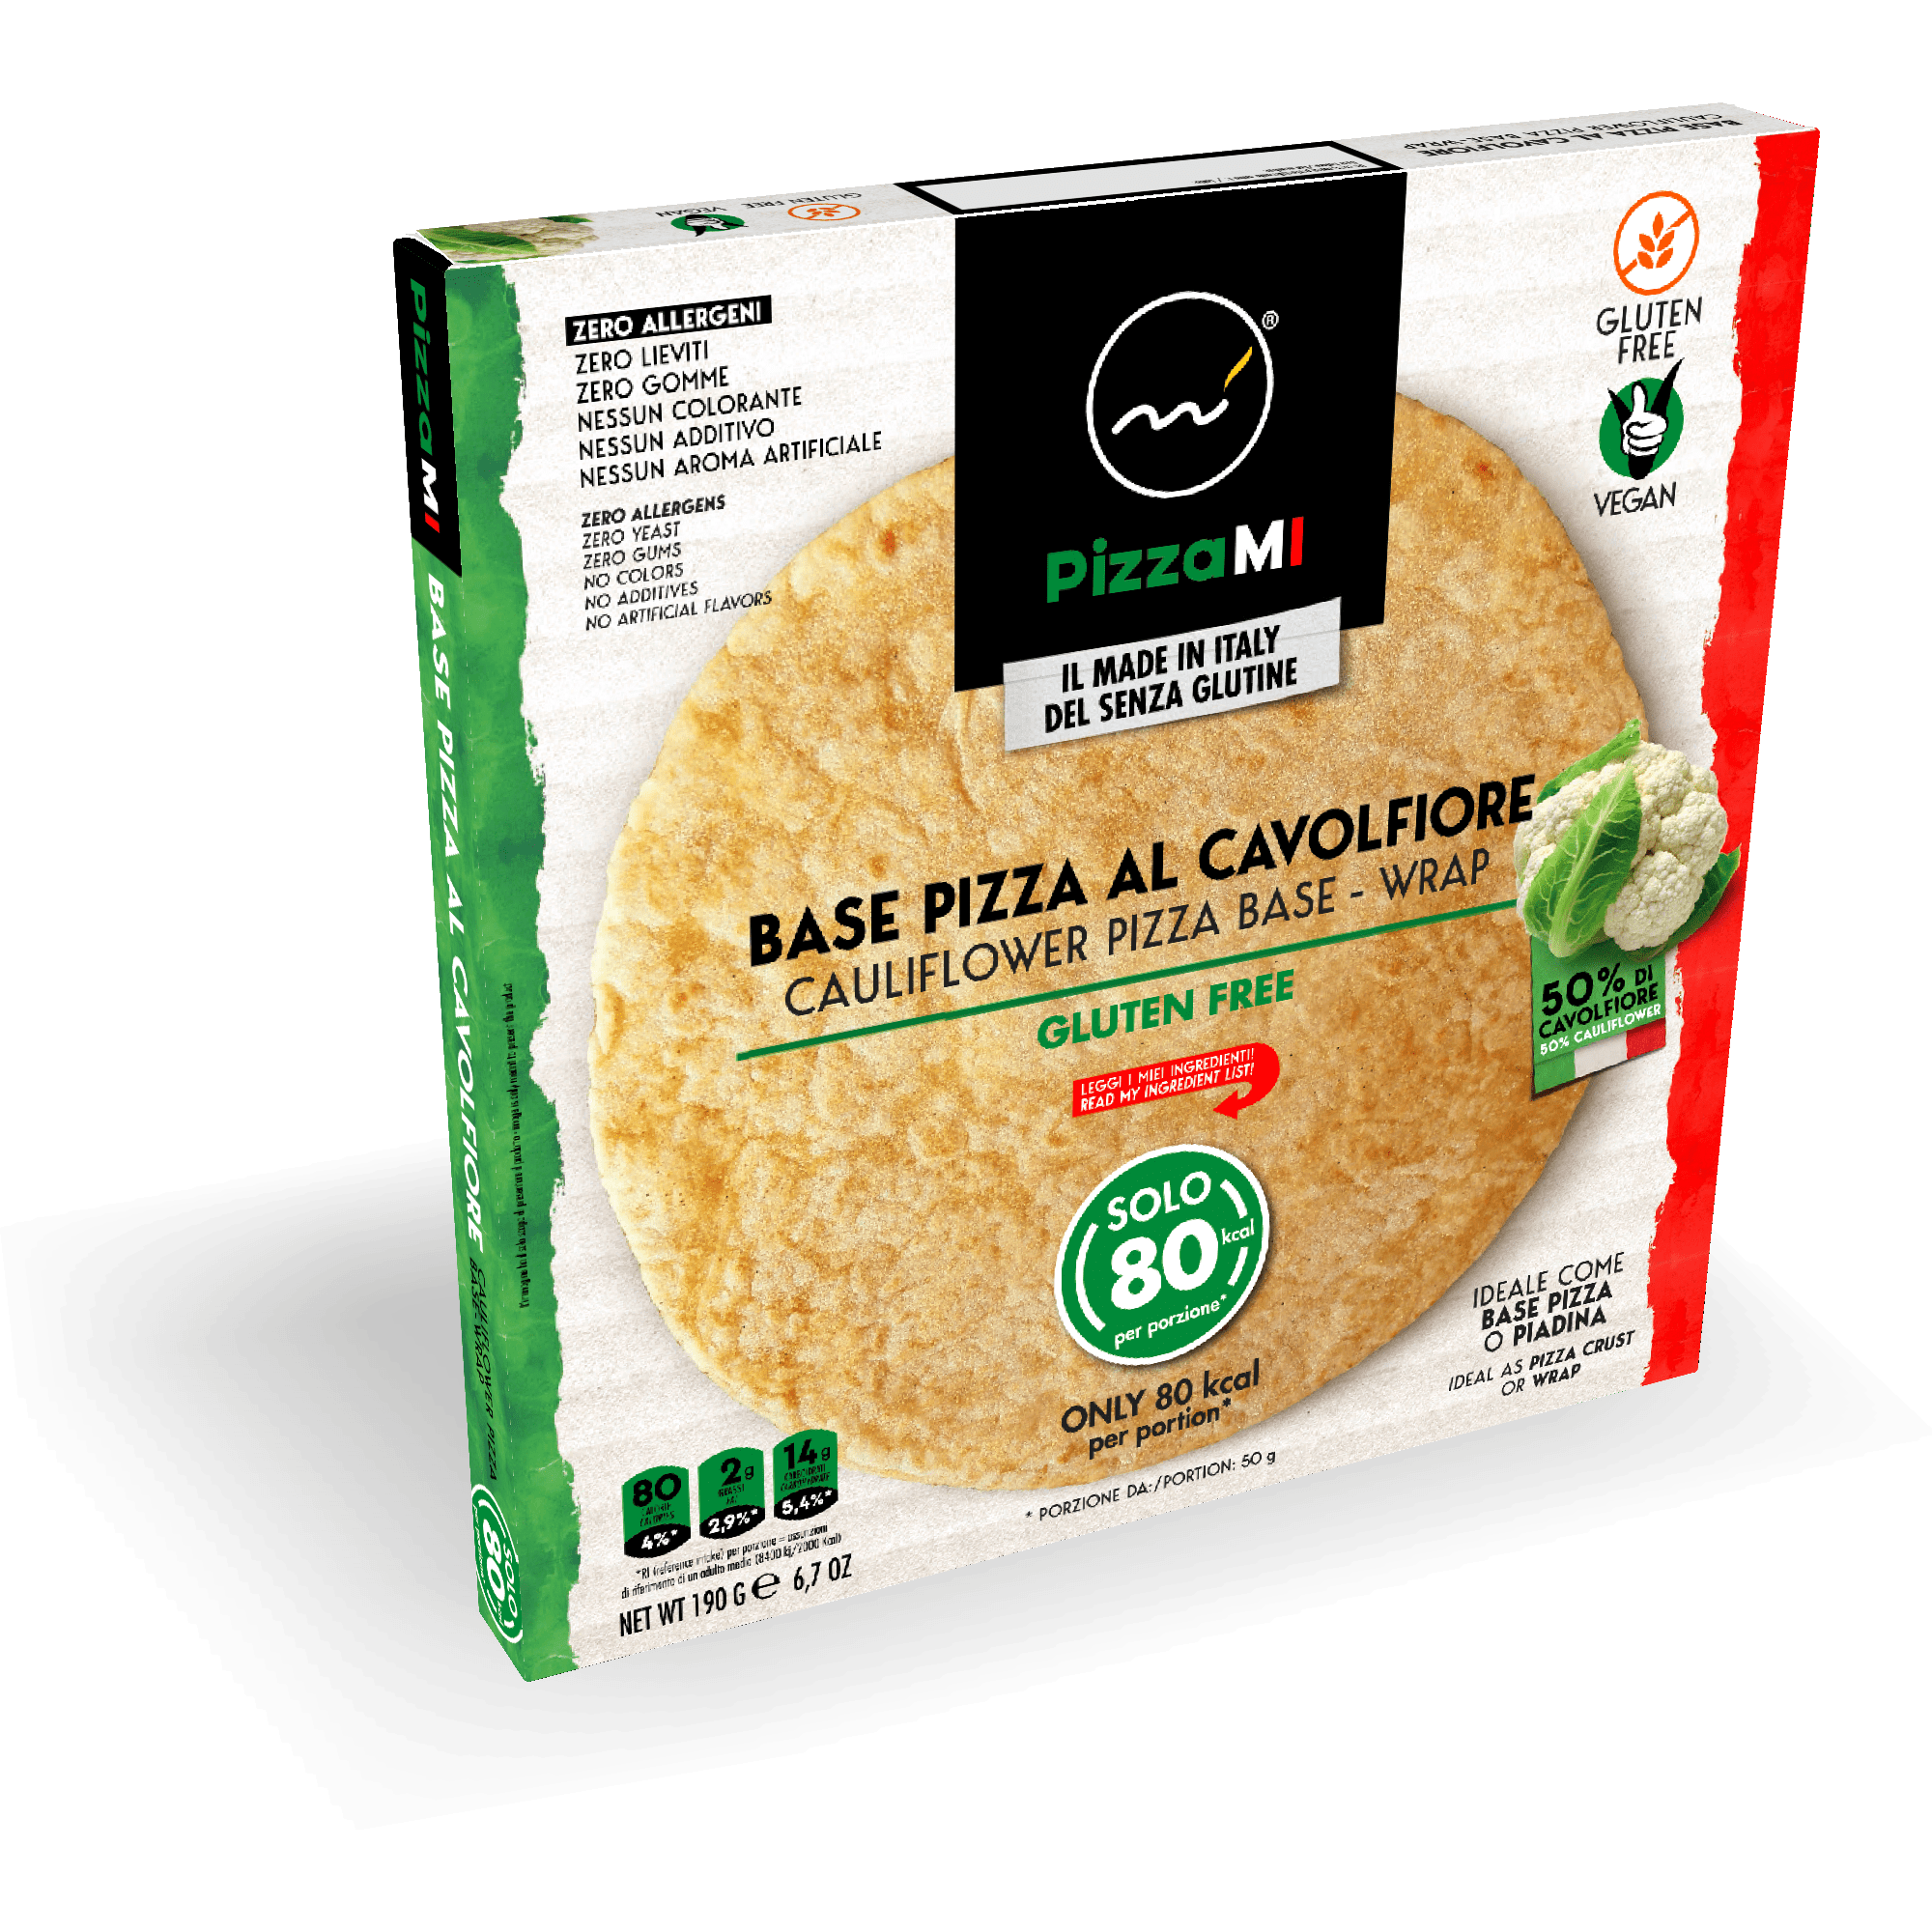 Frozen Gluten free Califlower low carb pizza crust Pizzami or available for Private label -- RETAIL